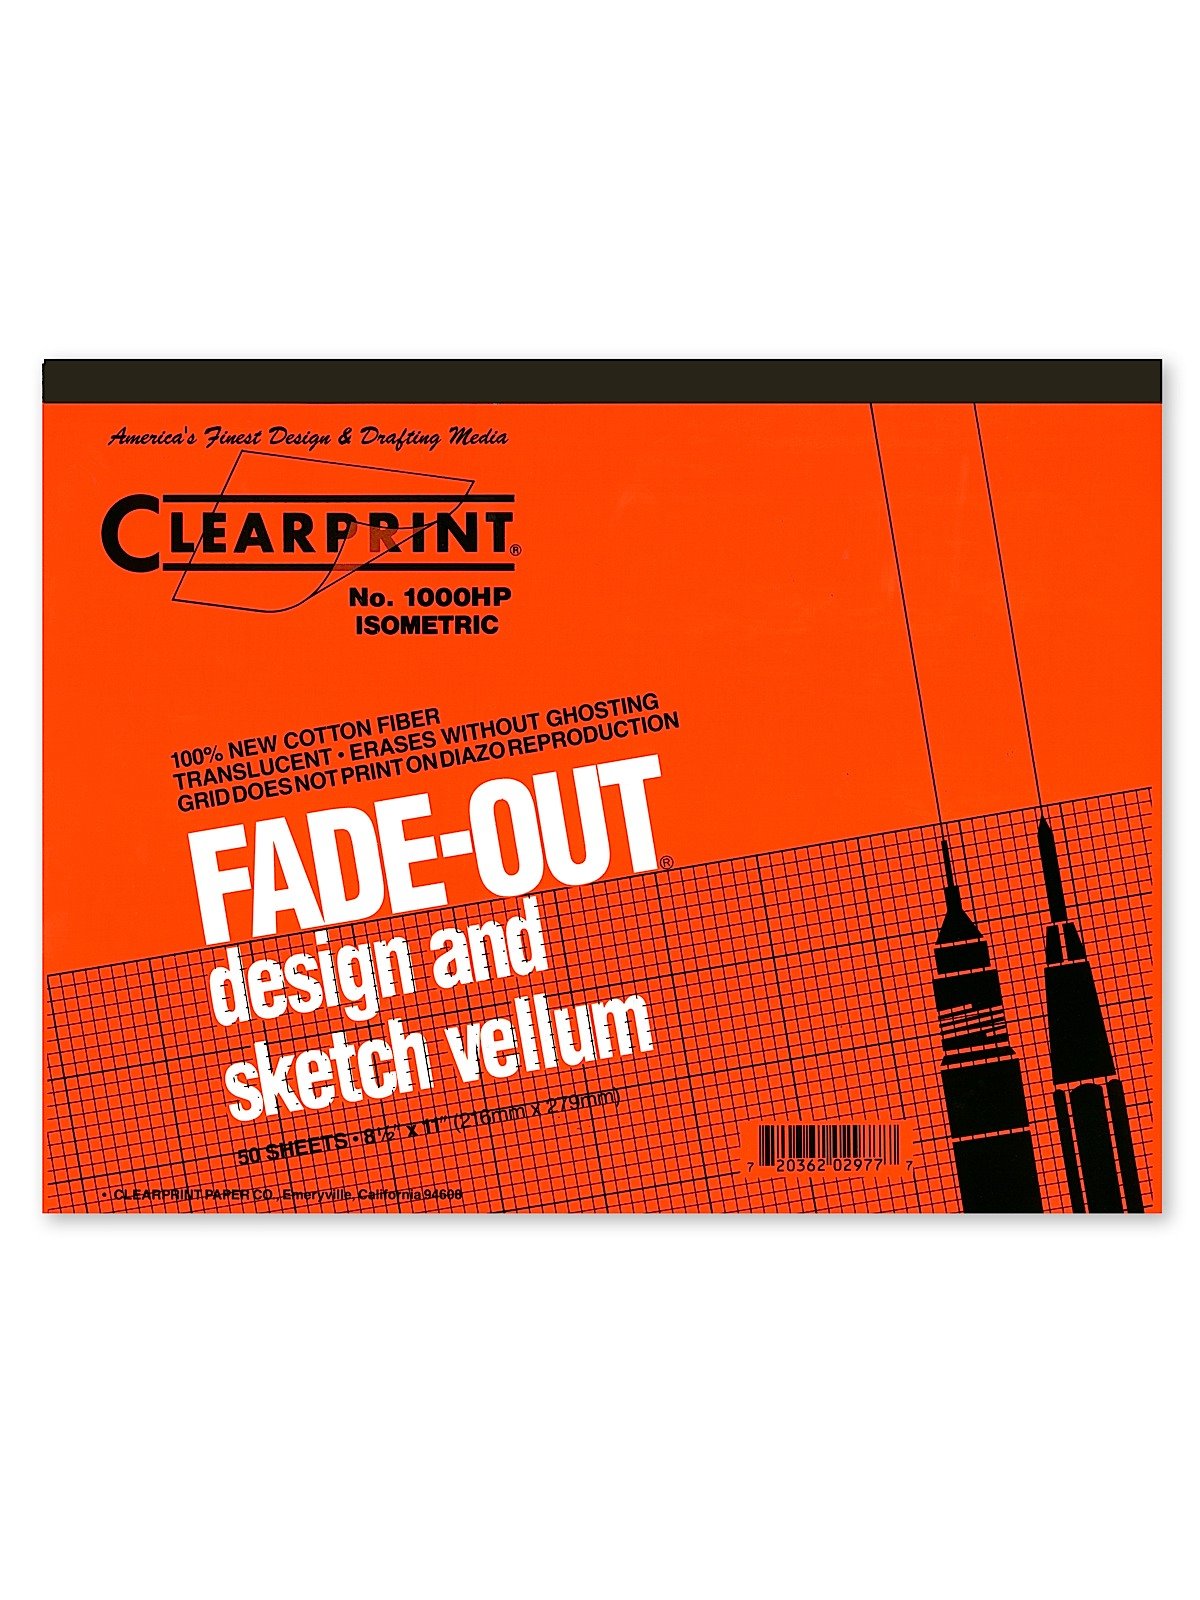 Clearprint - Fade-Out Design and Sketch Vellum - Isometric